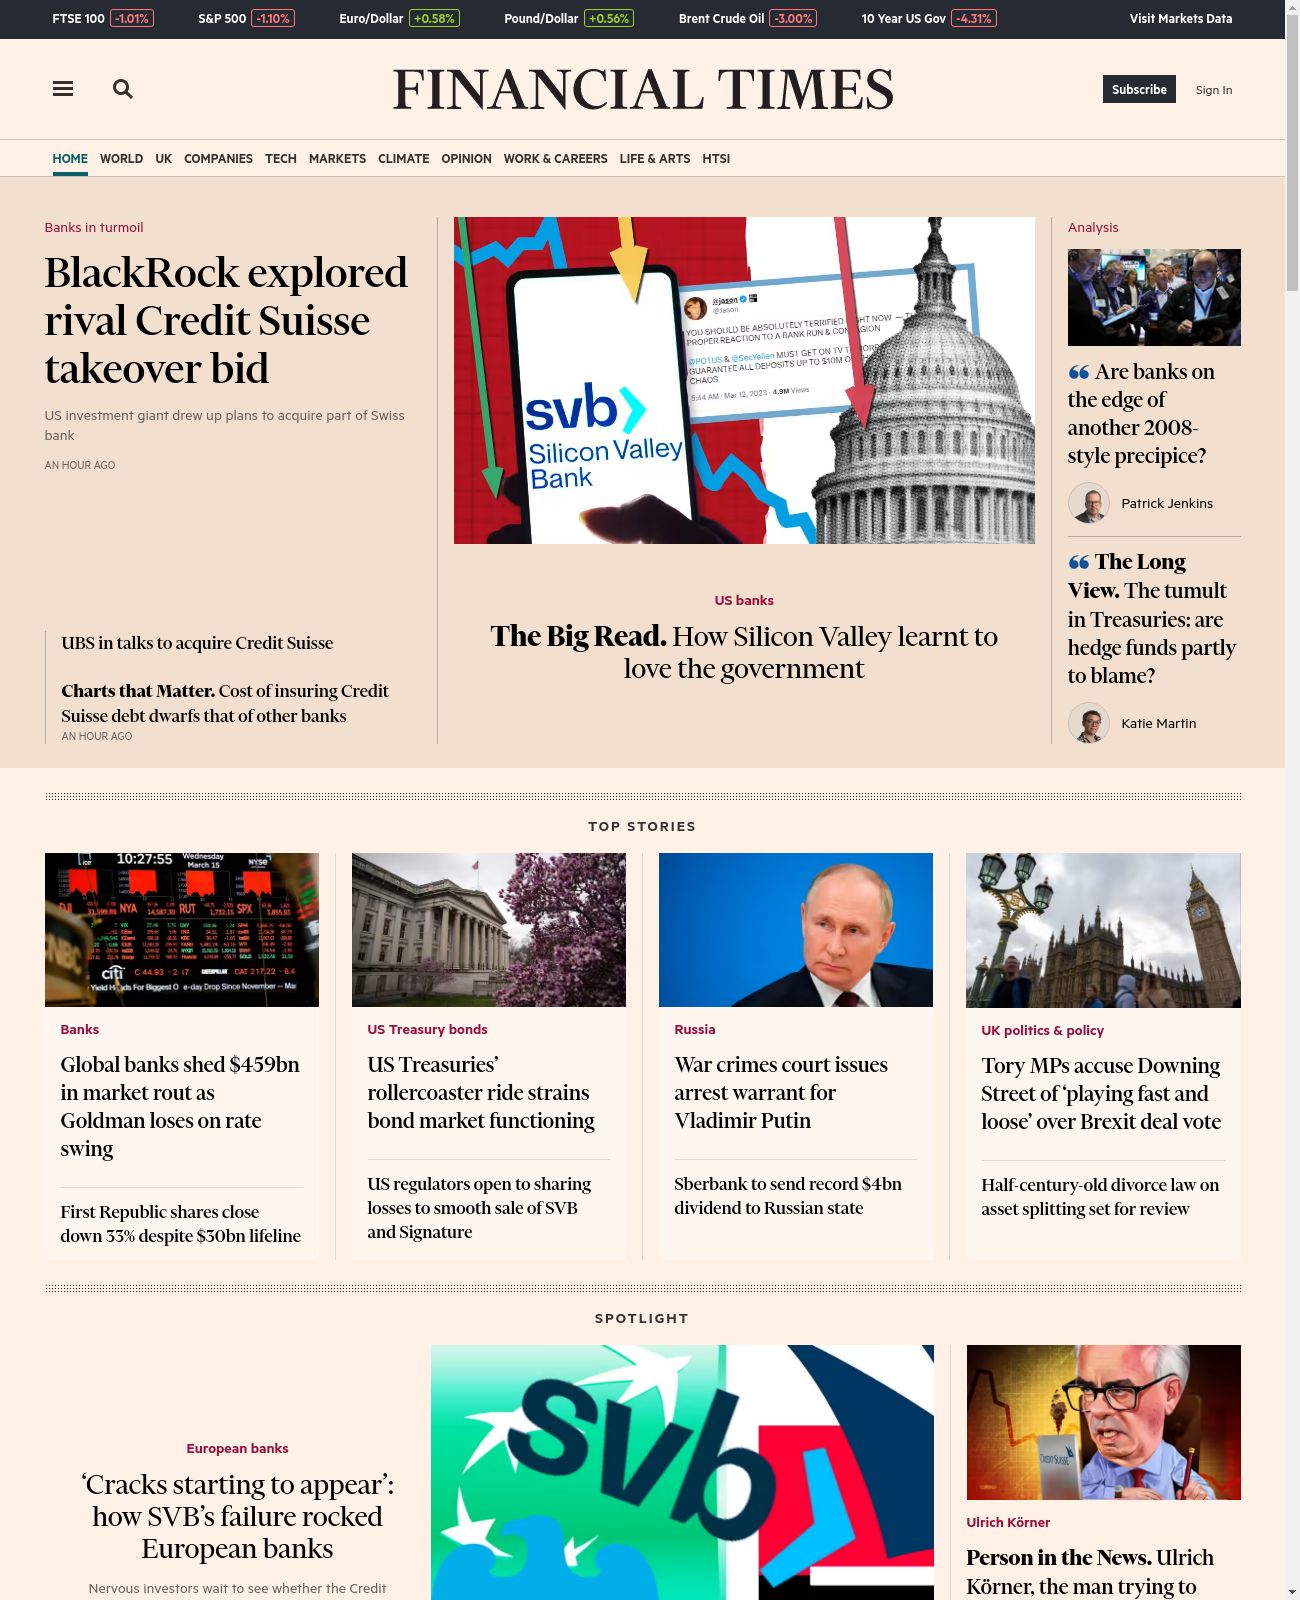 Financial Times at 2023-03-18 13:27:53+00:00 local time